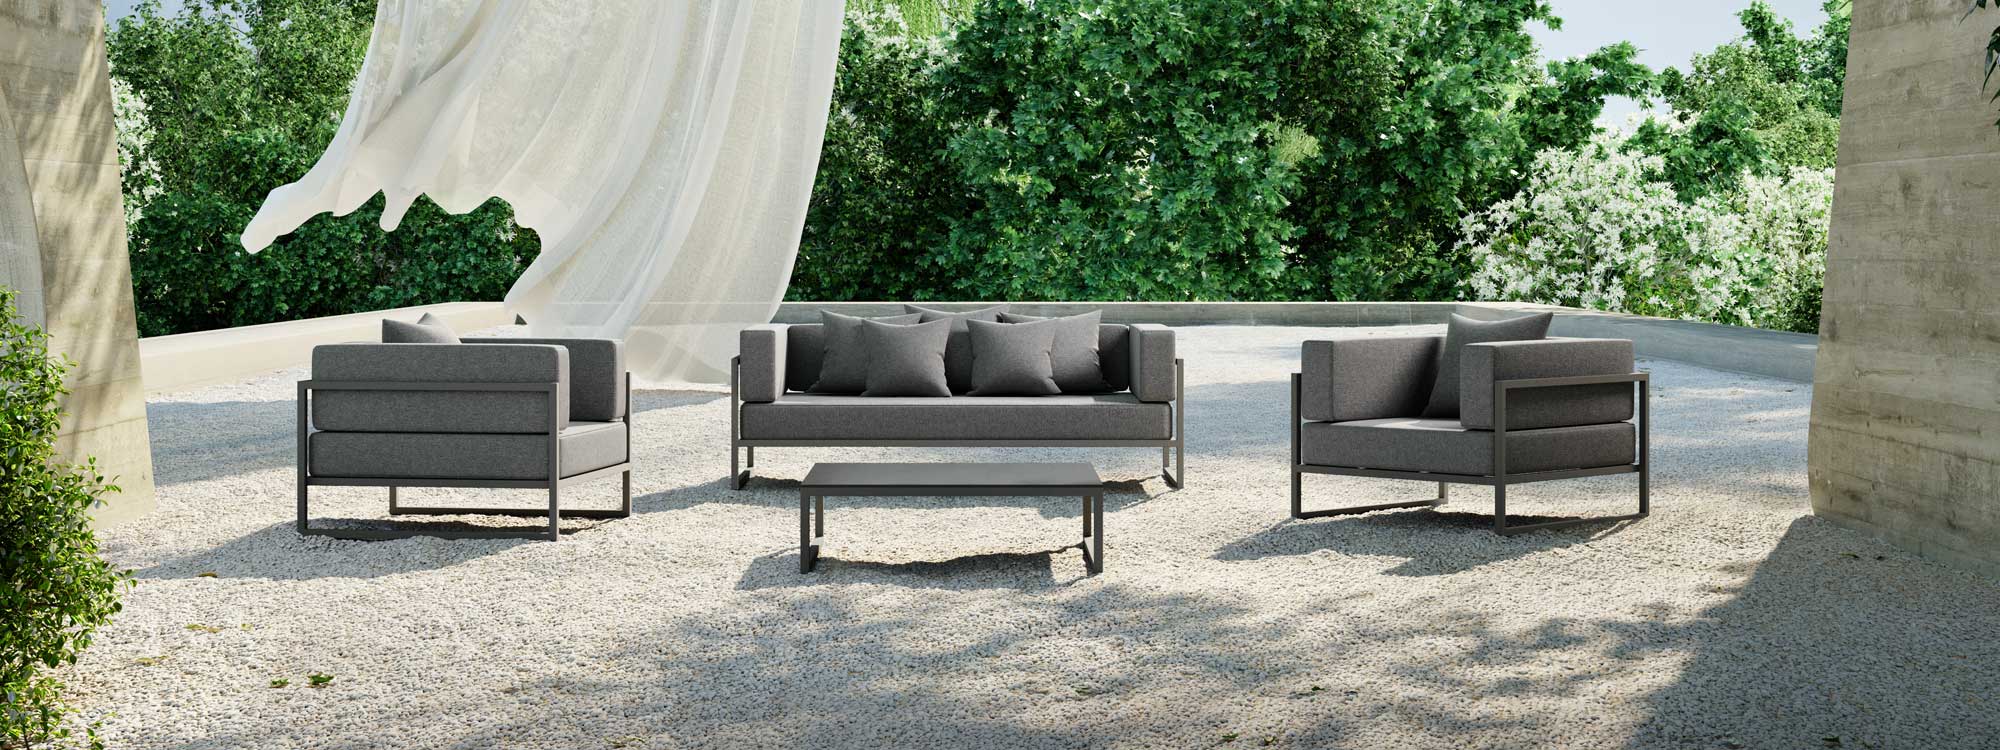 Image of Oiside Línea 2 seat garden sofa and and lounge chairs on large gravel terrace with trees in the background and a white drape being blow in the foreground